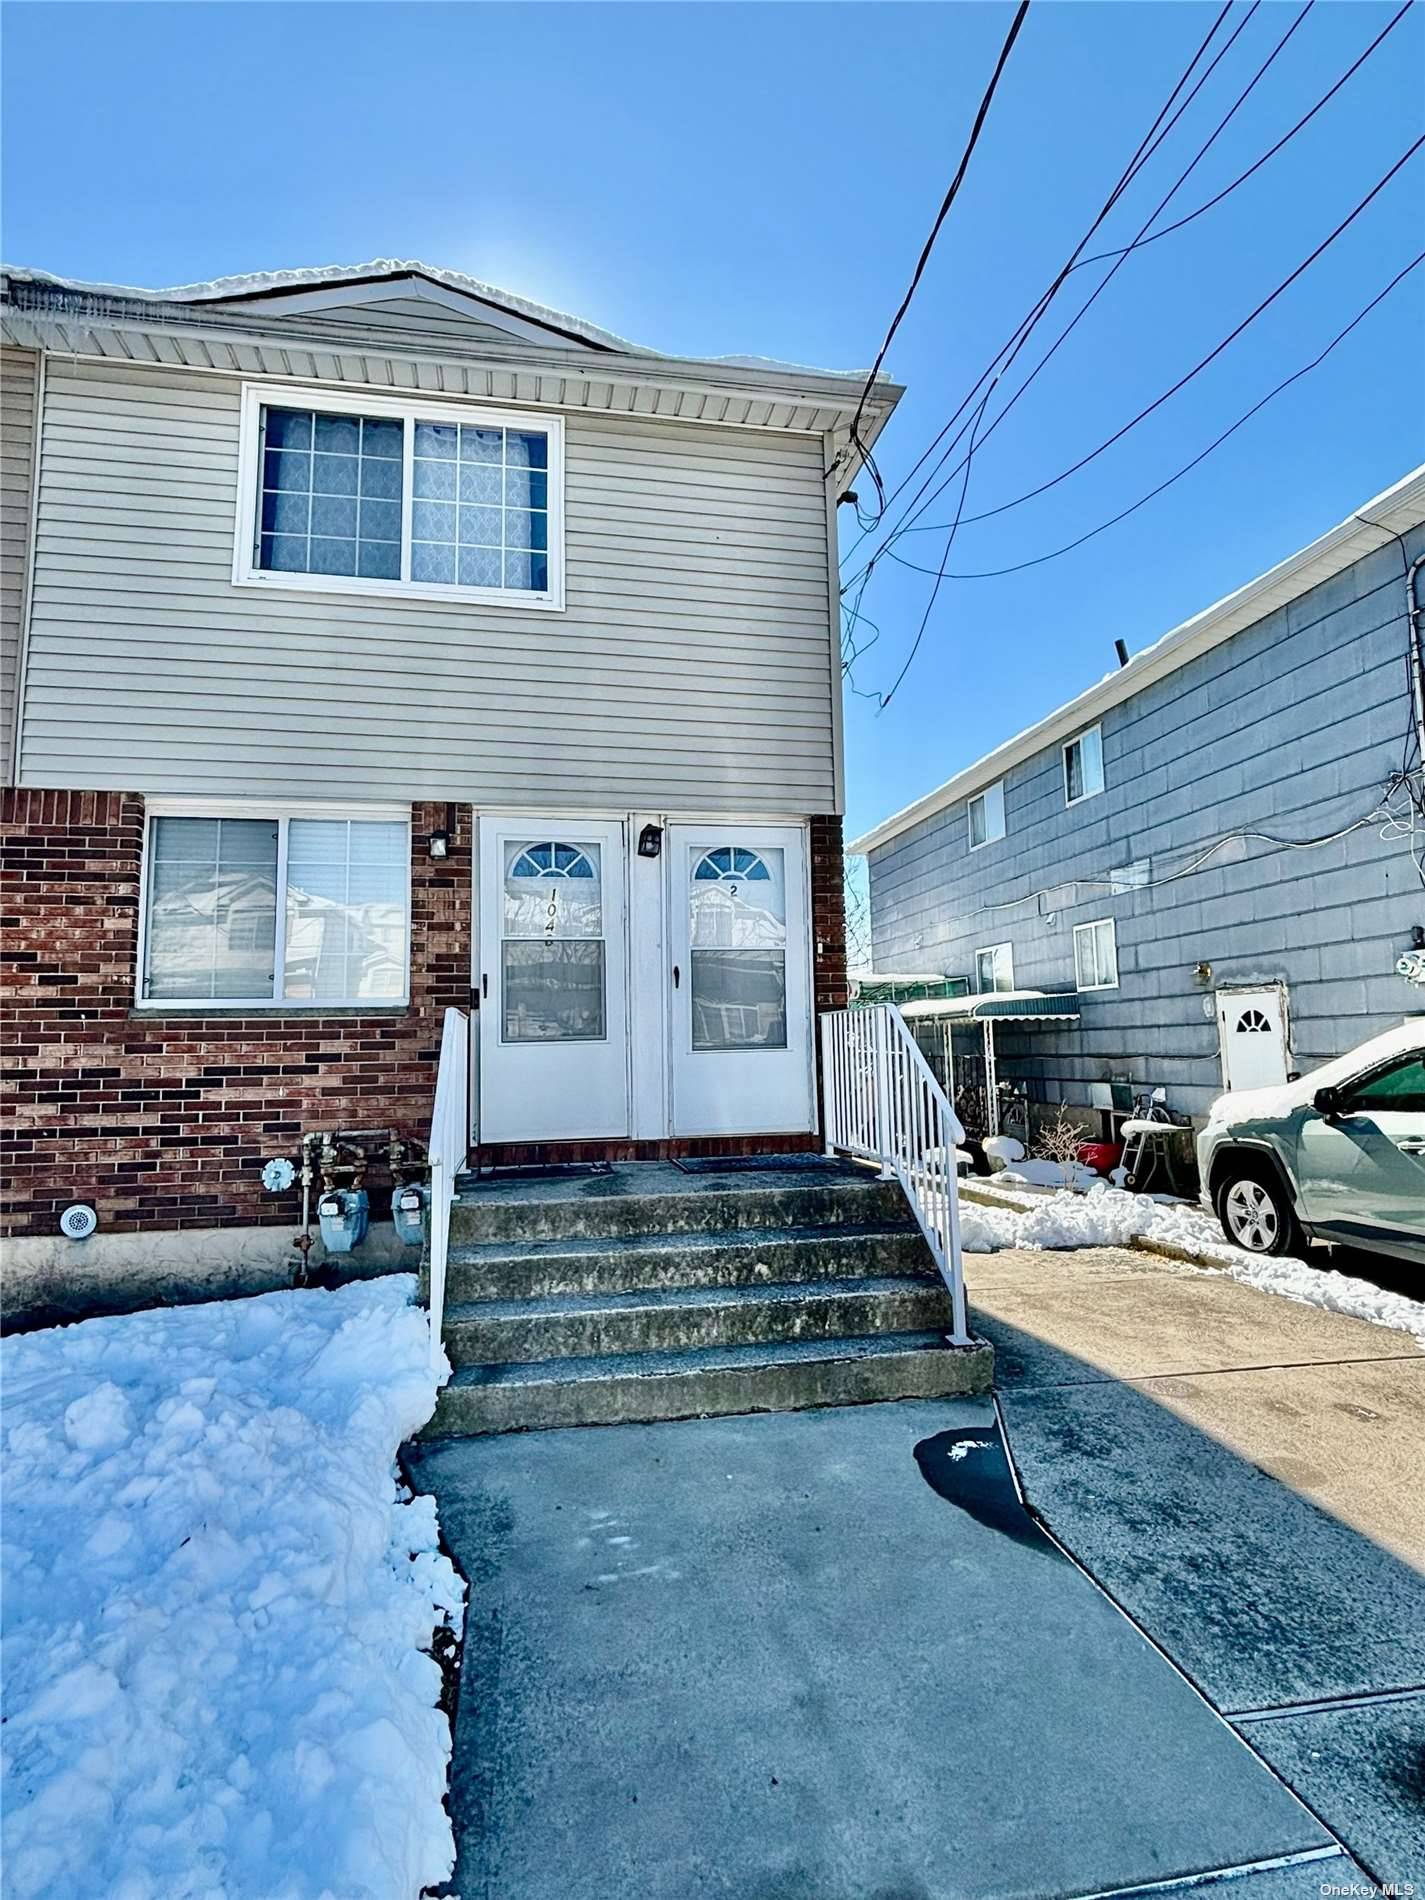 Legal 2 Family IN Highly Desired Area 1st Floor Duplex with Basement 2 Bedroom 2 Full Bath W Backyard amp ; Parking, Laundry Room, Utility Room, Boiler Room 2Nd Floor ...